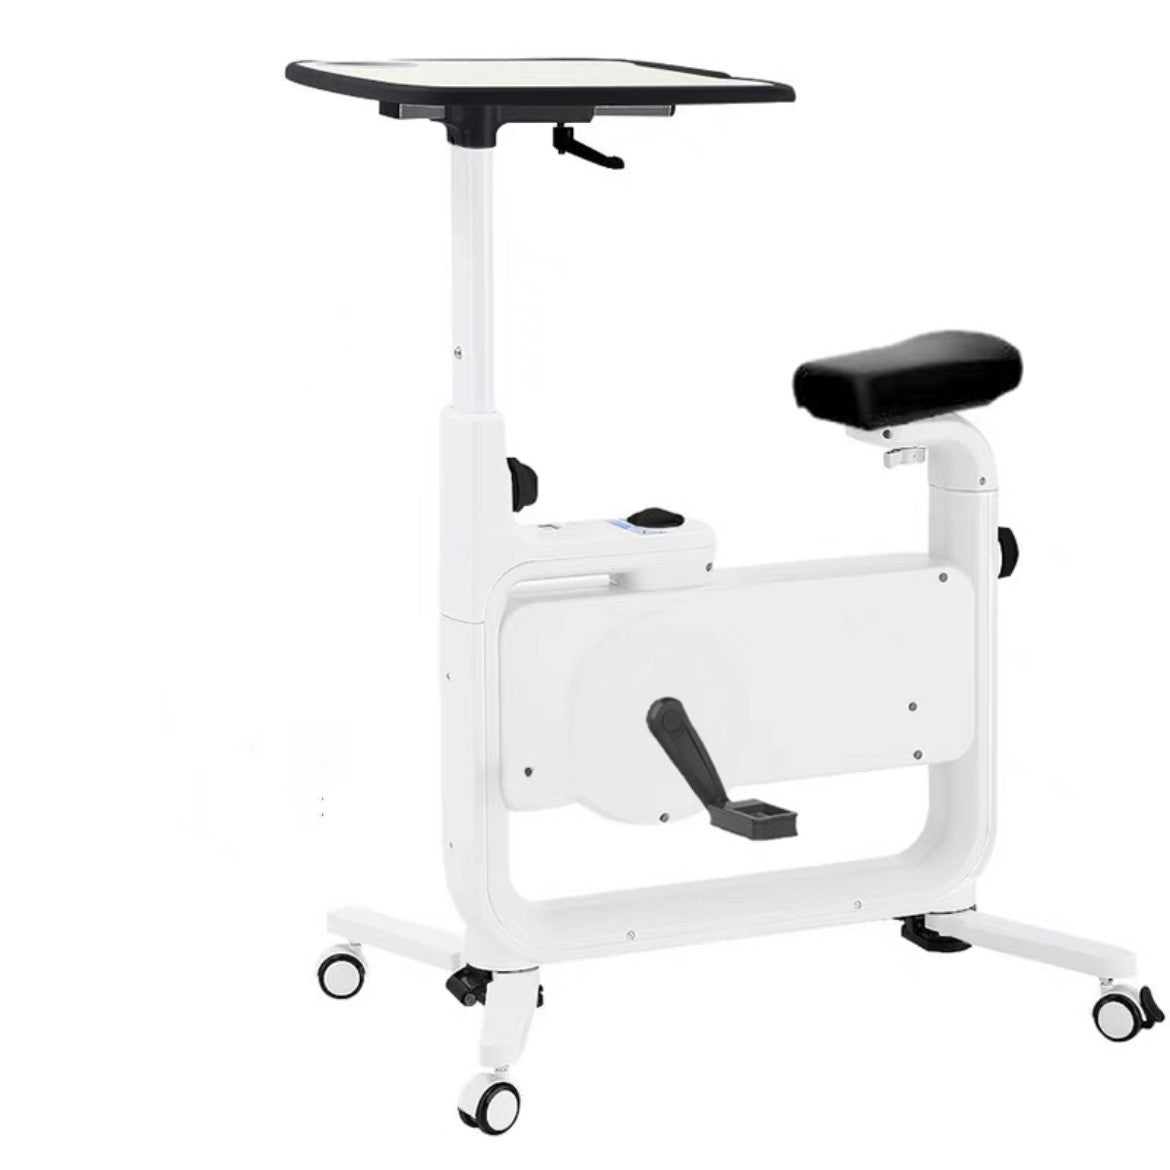 Desk Home Exercise Bike Small Magnetic Control Silent Aerobic Exercise fitness & sports